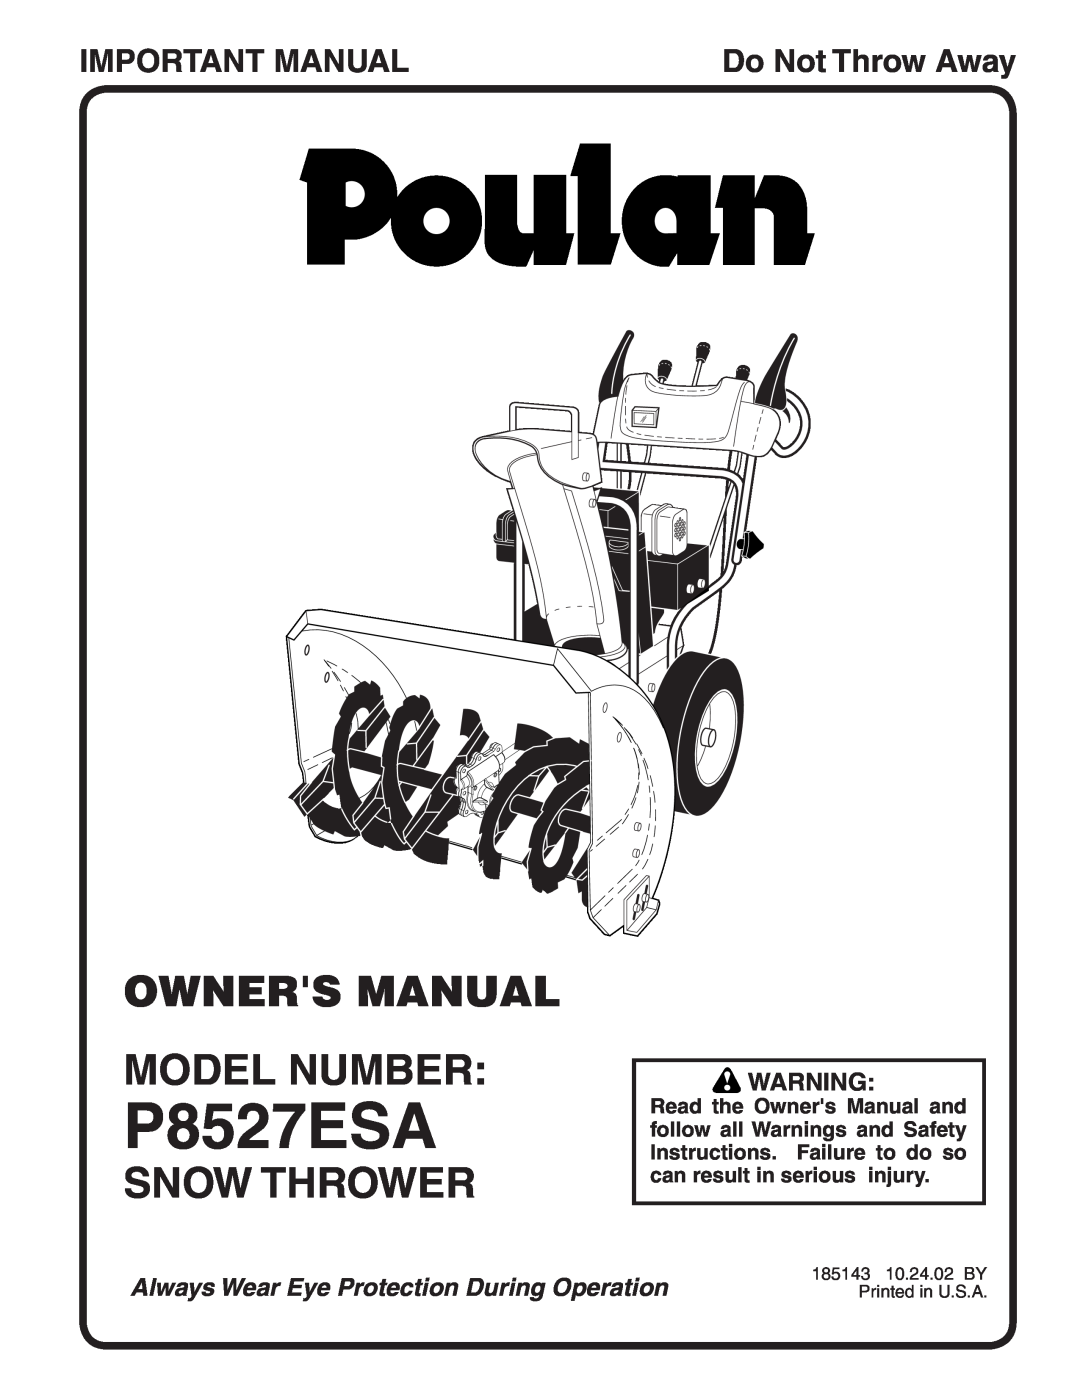 Poulan P8527ESA owner manual Owners Manual Model Number, Snow Thrower, Important Manual, Do Not Throw Away 